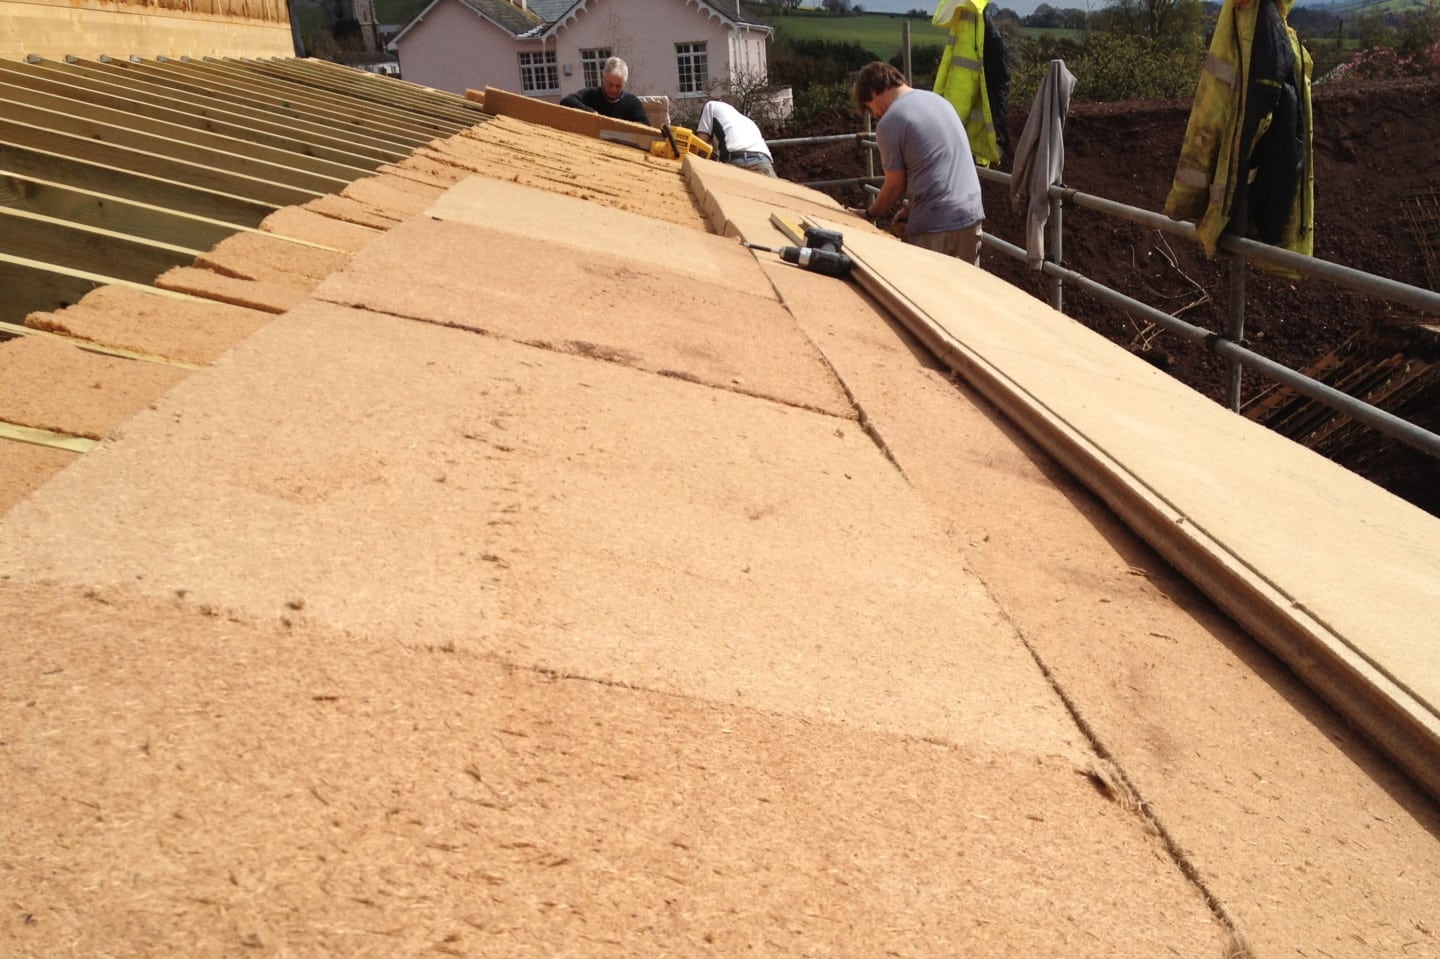 This image shows the UdiTOP being laid over a layer of UdiTHERM square edge wood fibre boards on top of rafters. This allows you to get very thick layers using the wet processed denser wood fibre boards as these don’t generally come any thicker than 120mm.